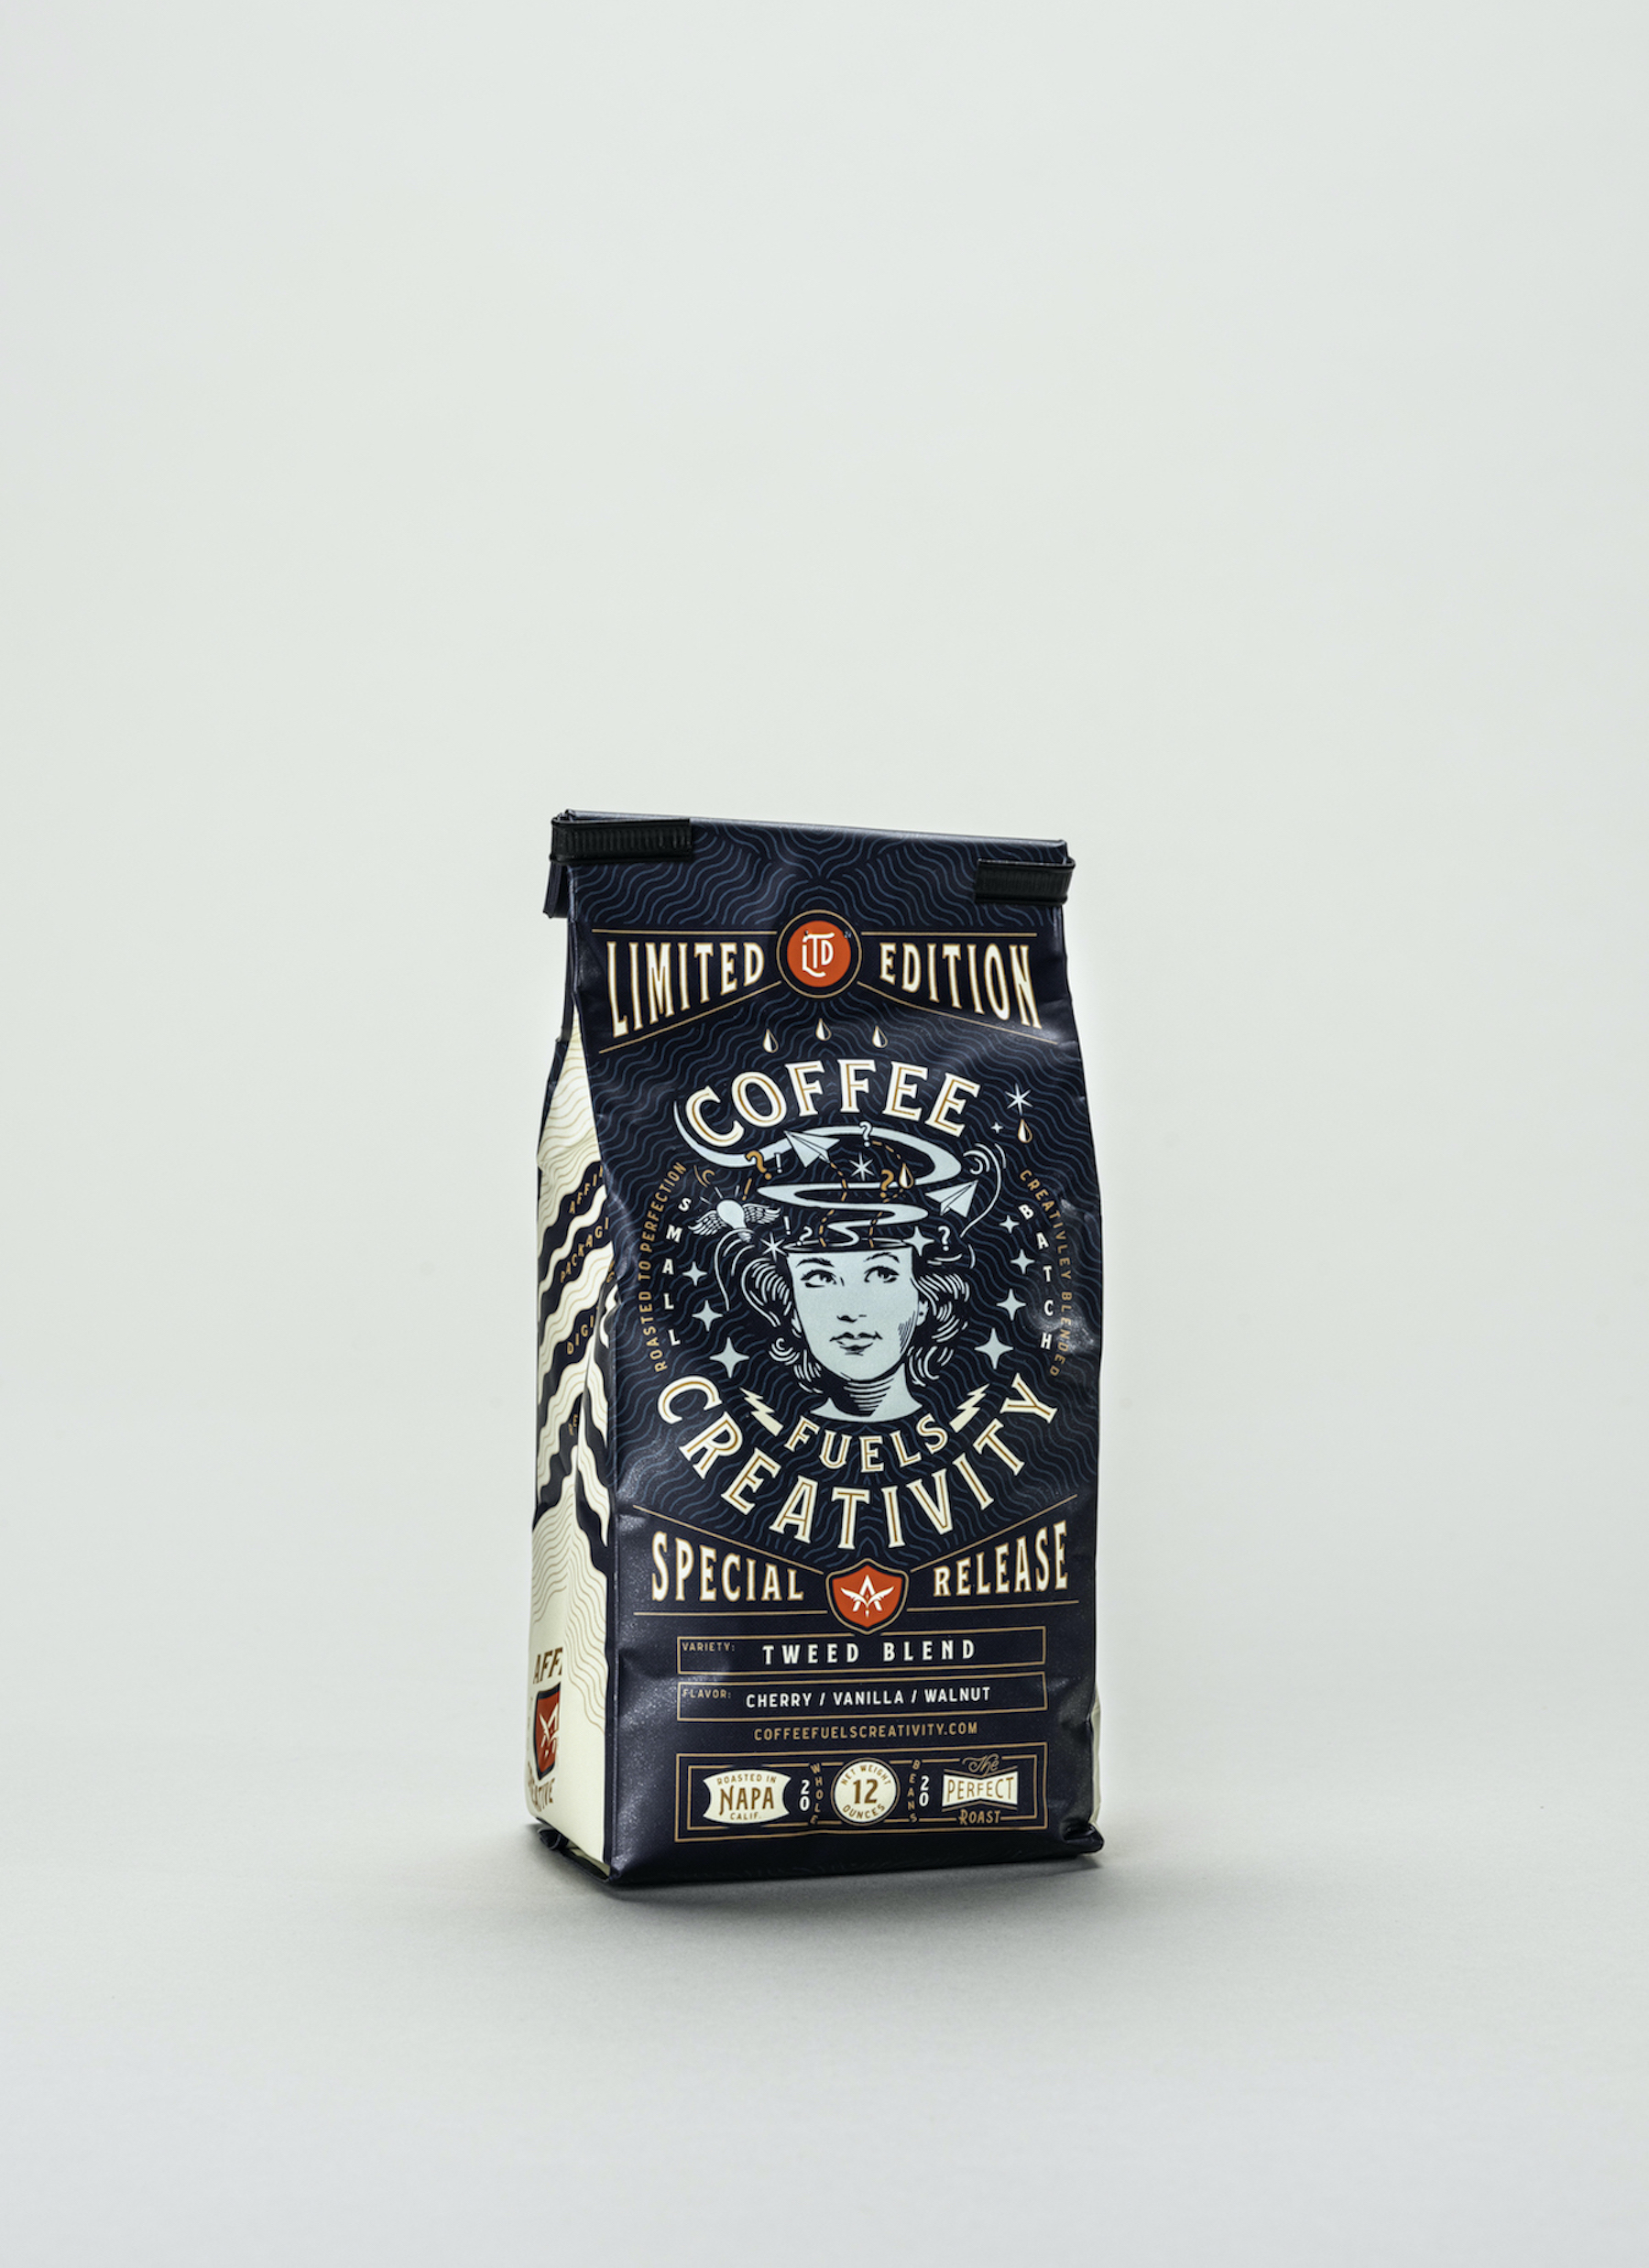 Coffee Fuels Creativity for Affinity Creative Group Self Promotion